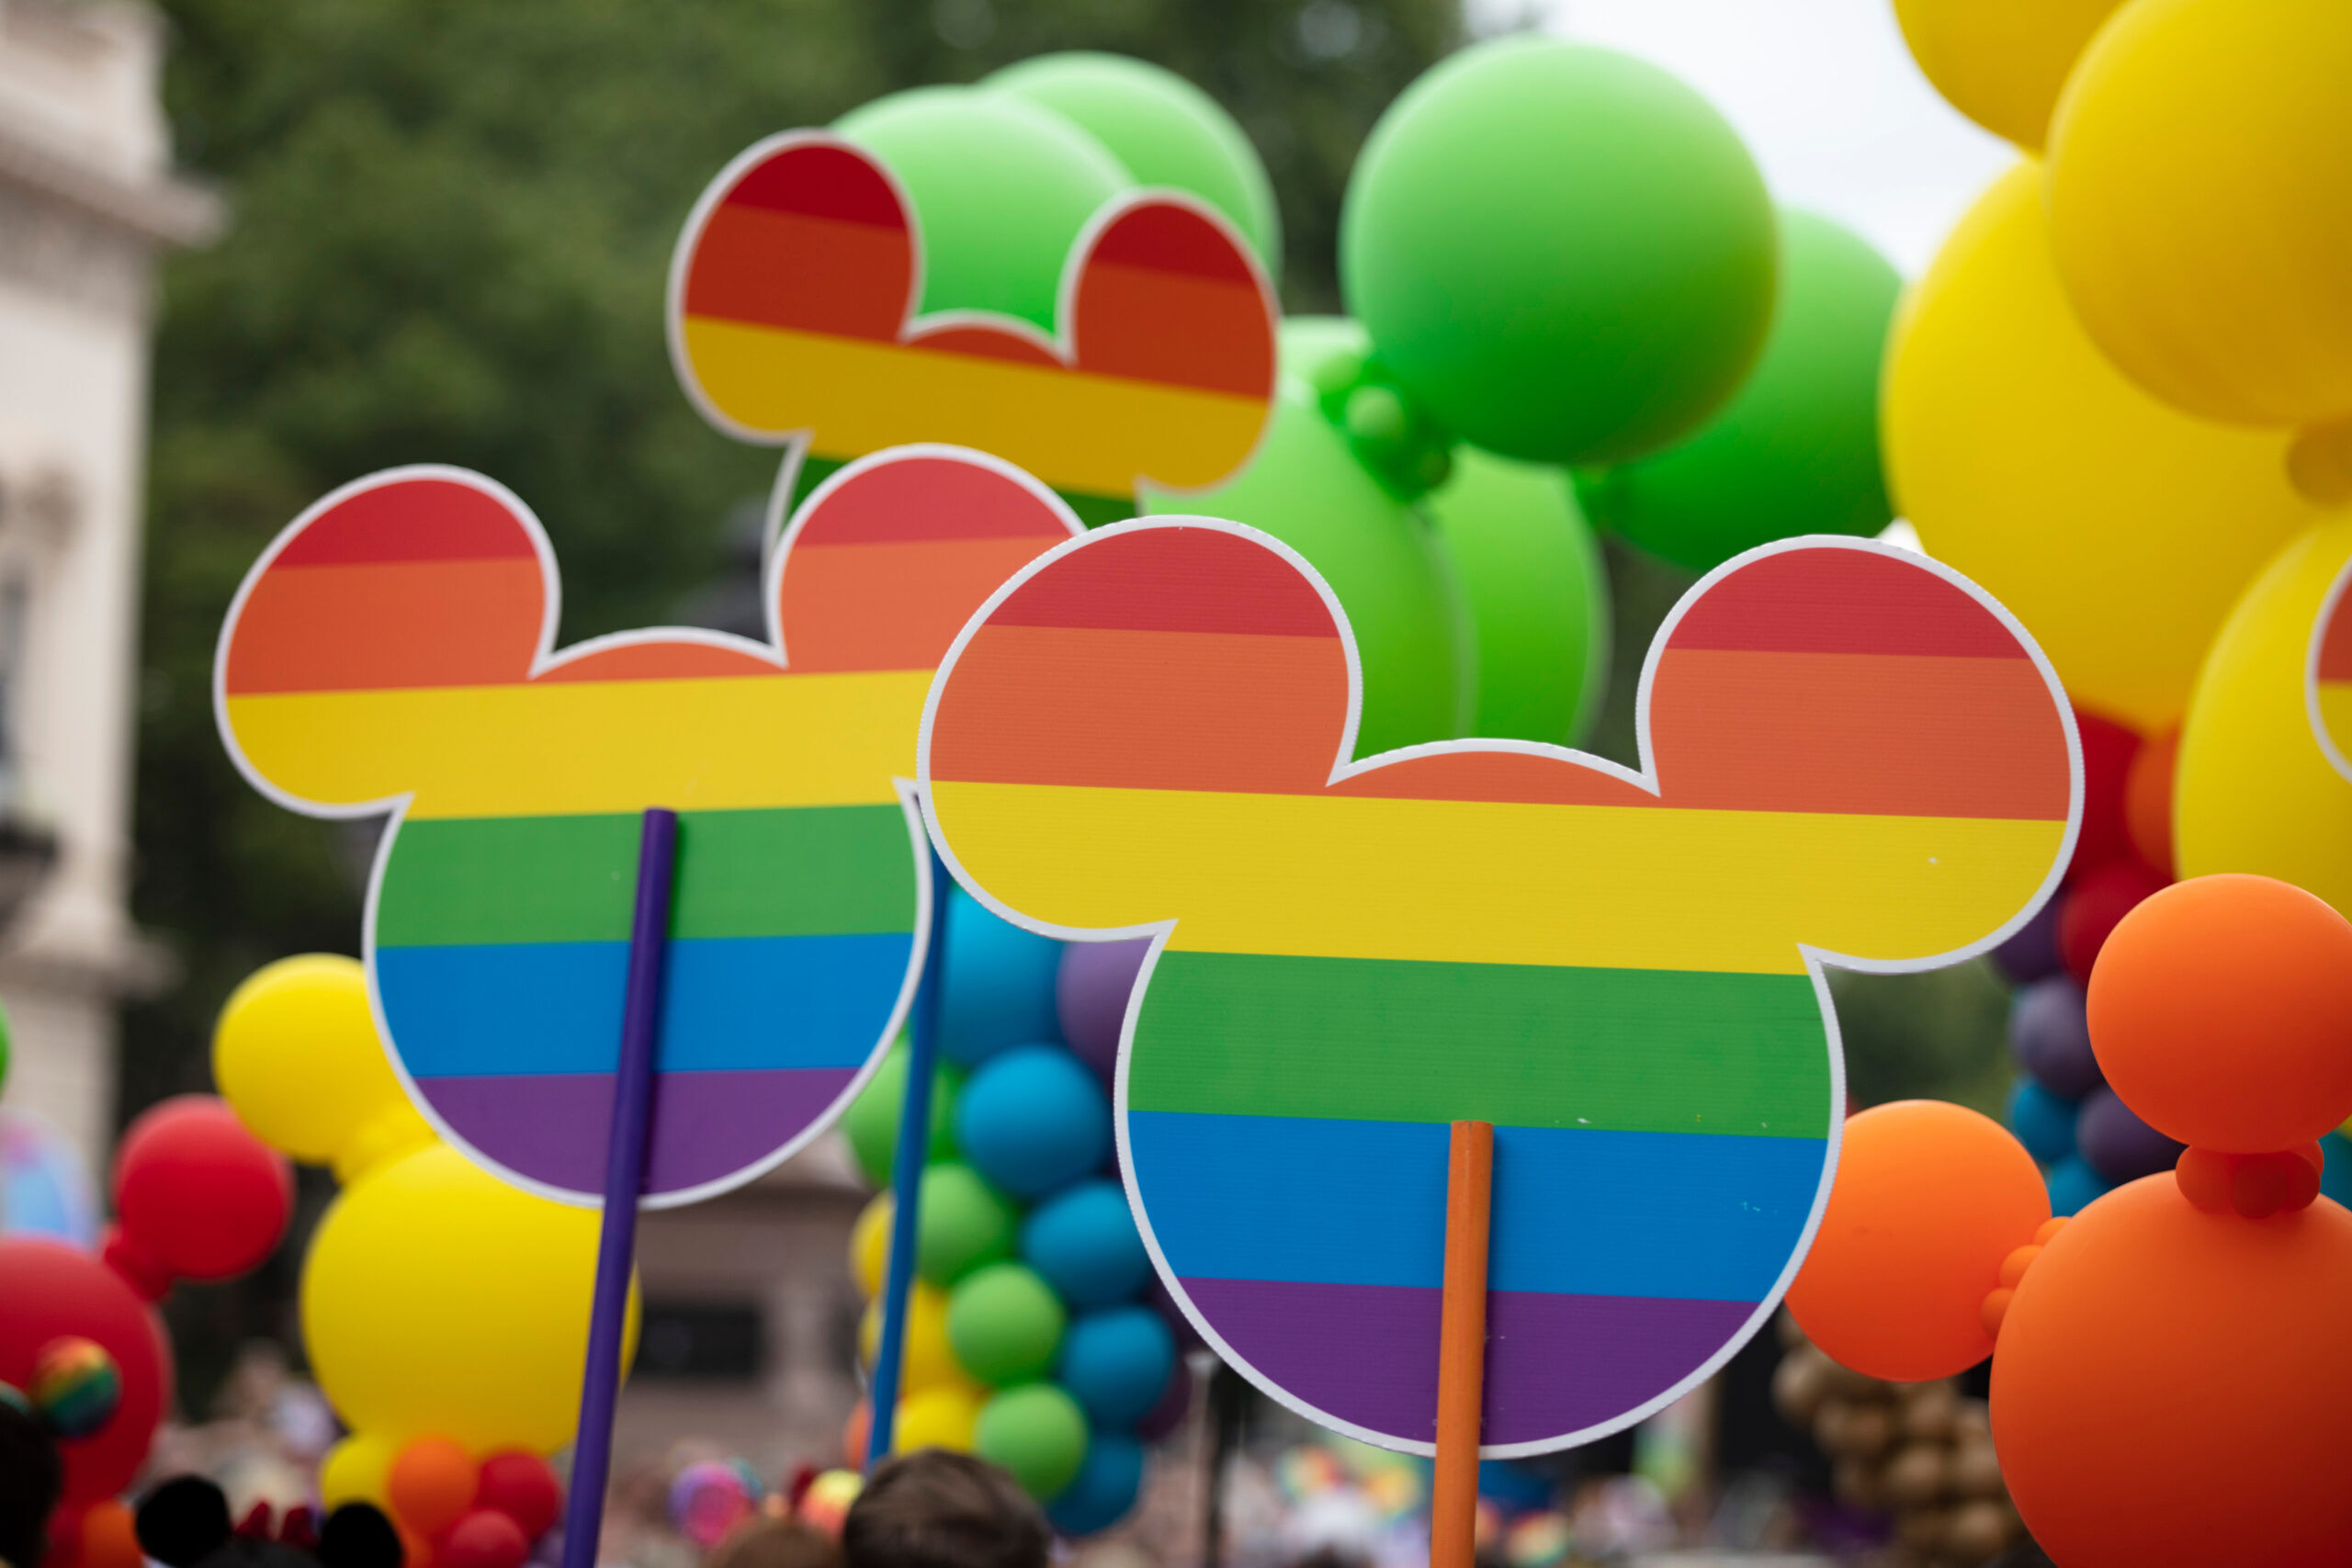 Mickey Mouse icon with gay rainbow flag design at the annual gay pride march in central London